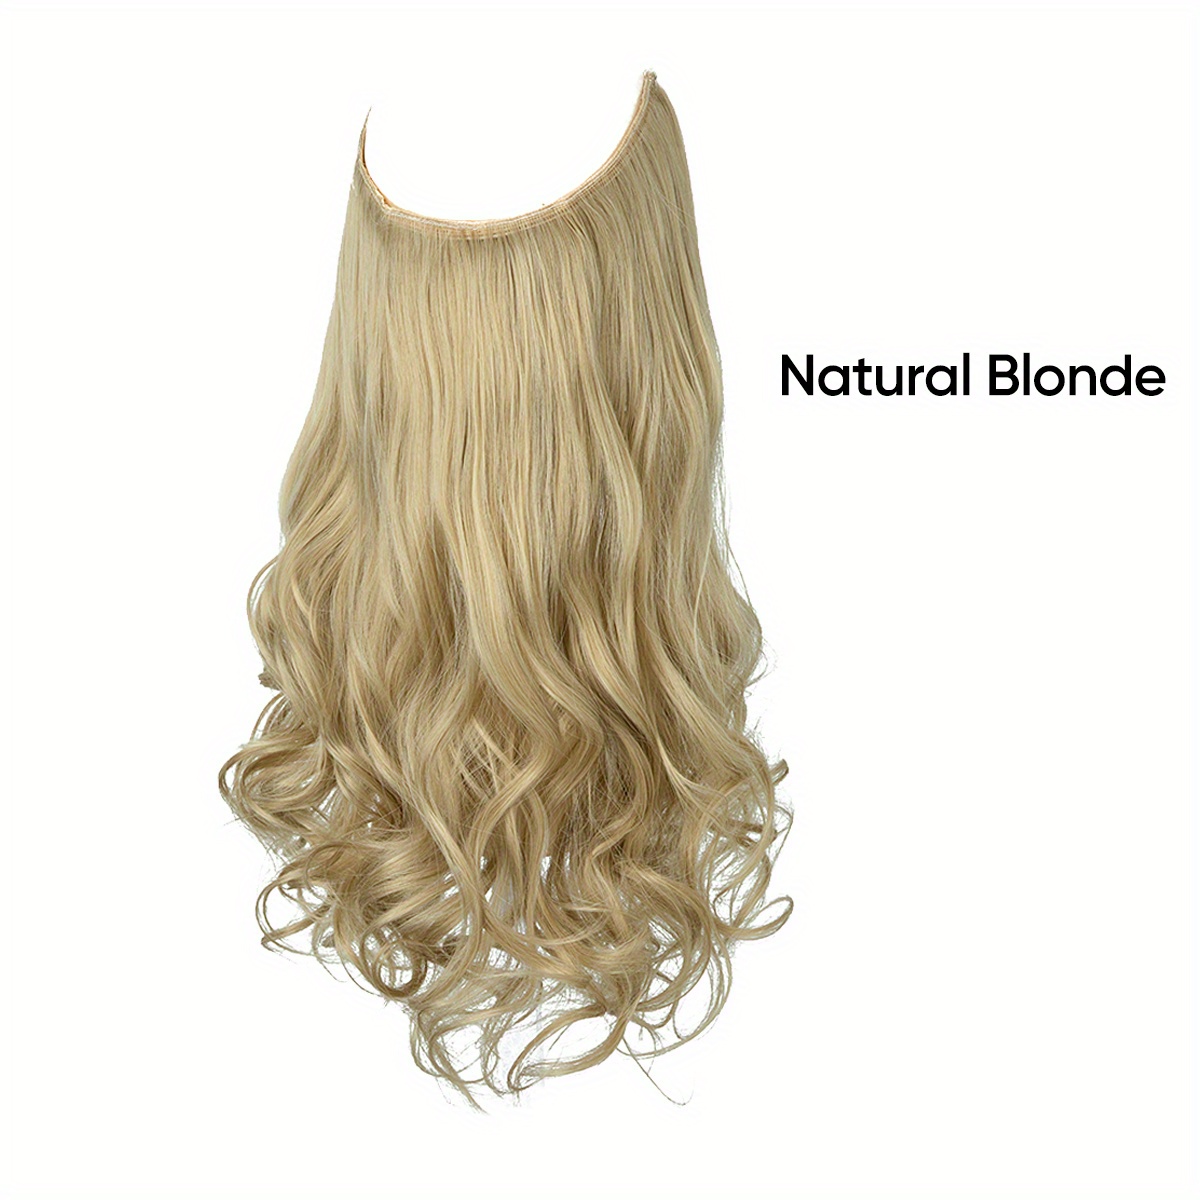 Hair Invisible Wire Wavy Curly Long Synthetic Hairpieces For Women Adjustable Headband Heat Friendly Fiber No Clip